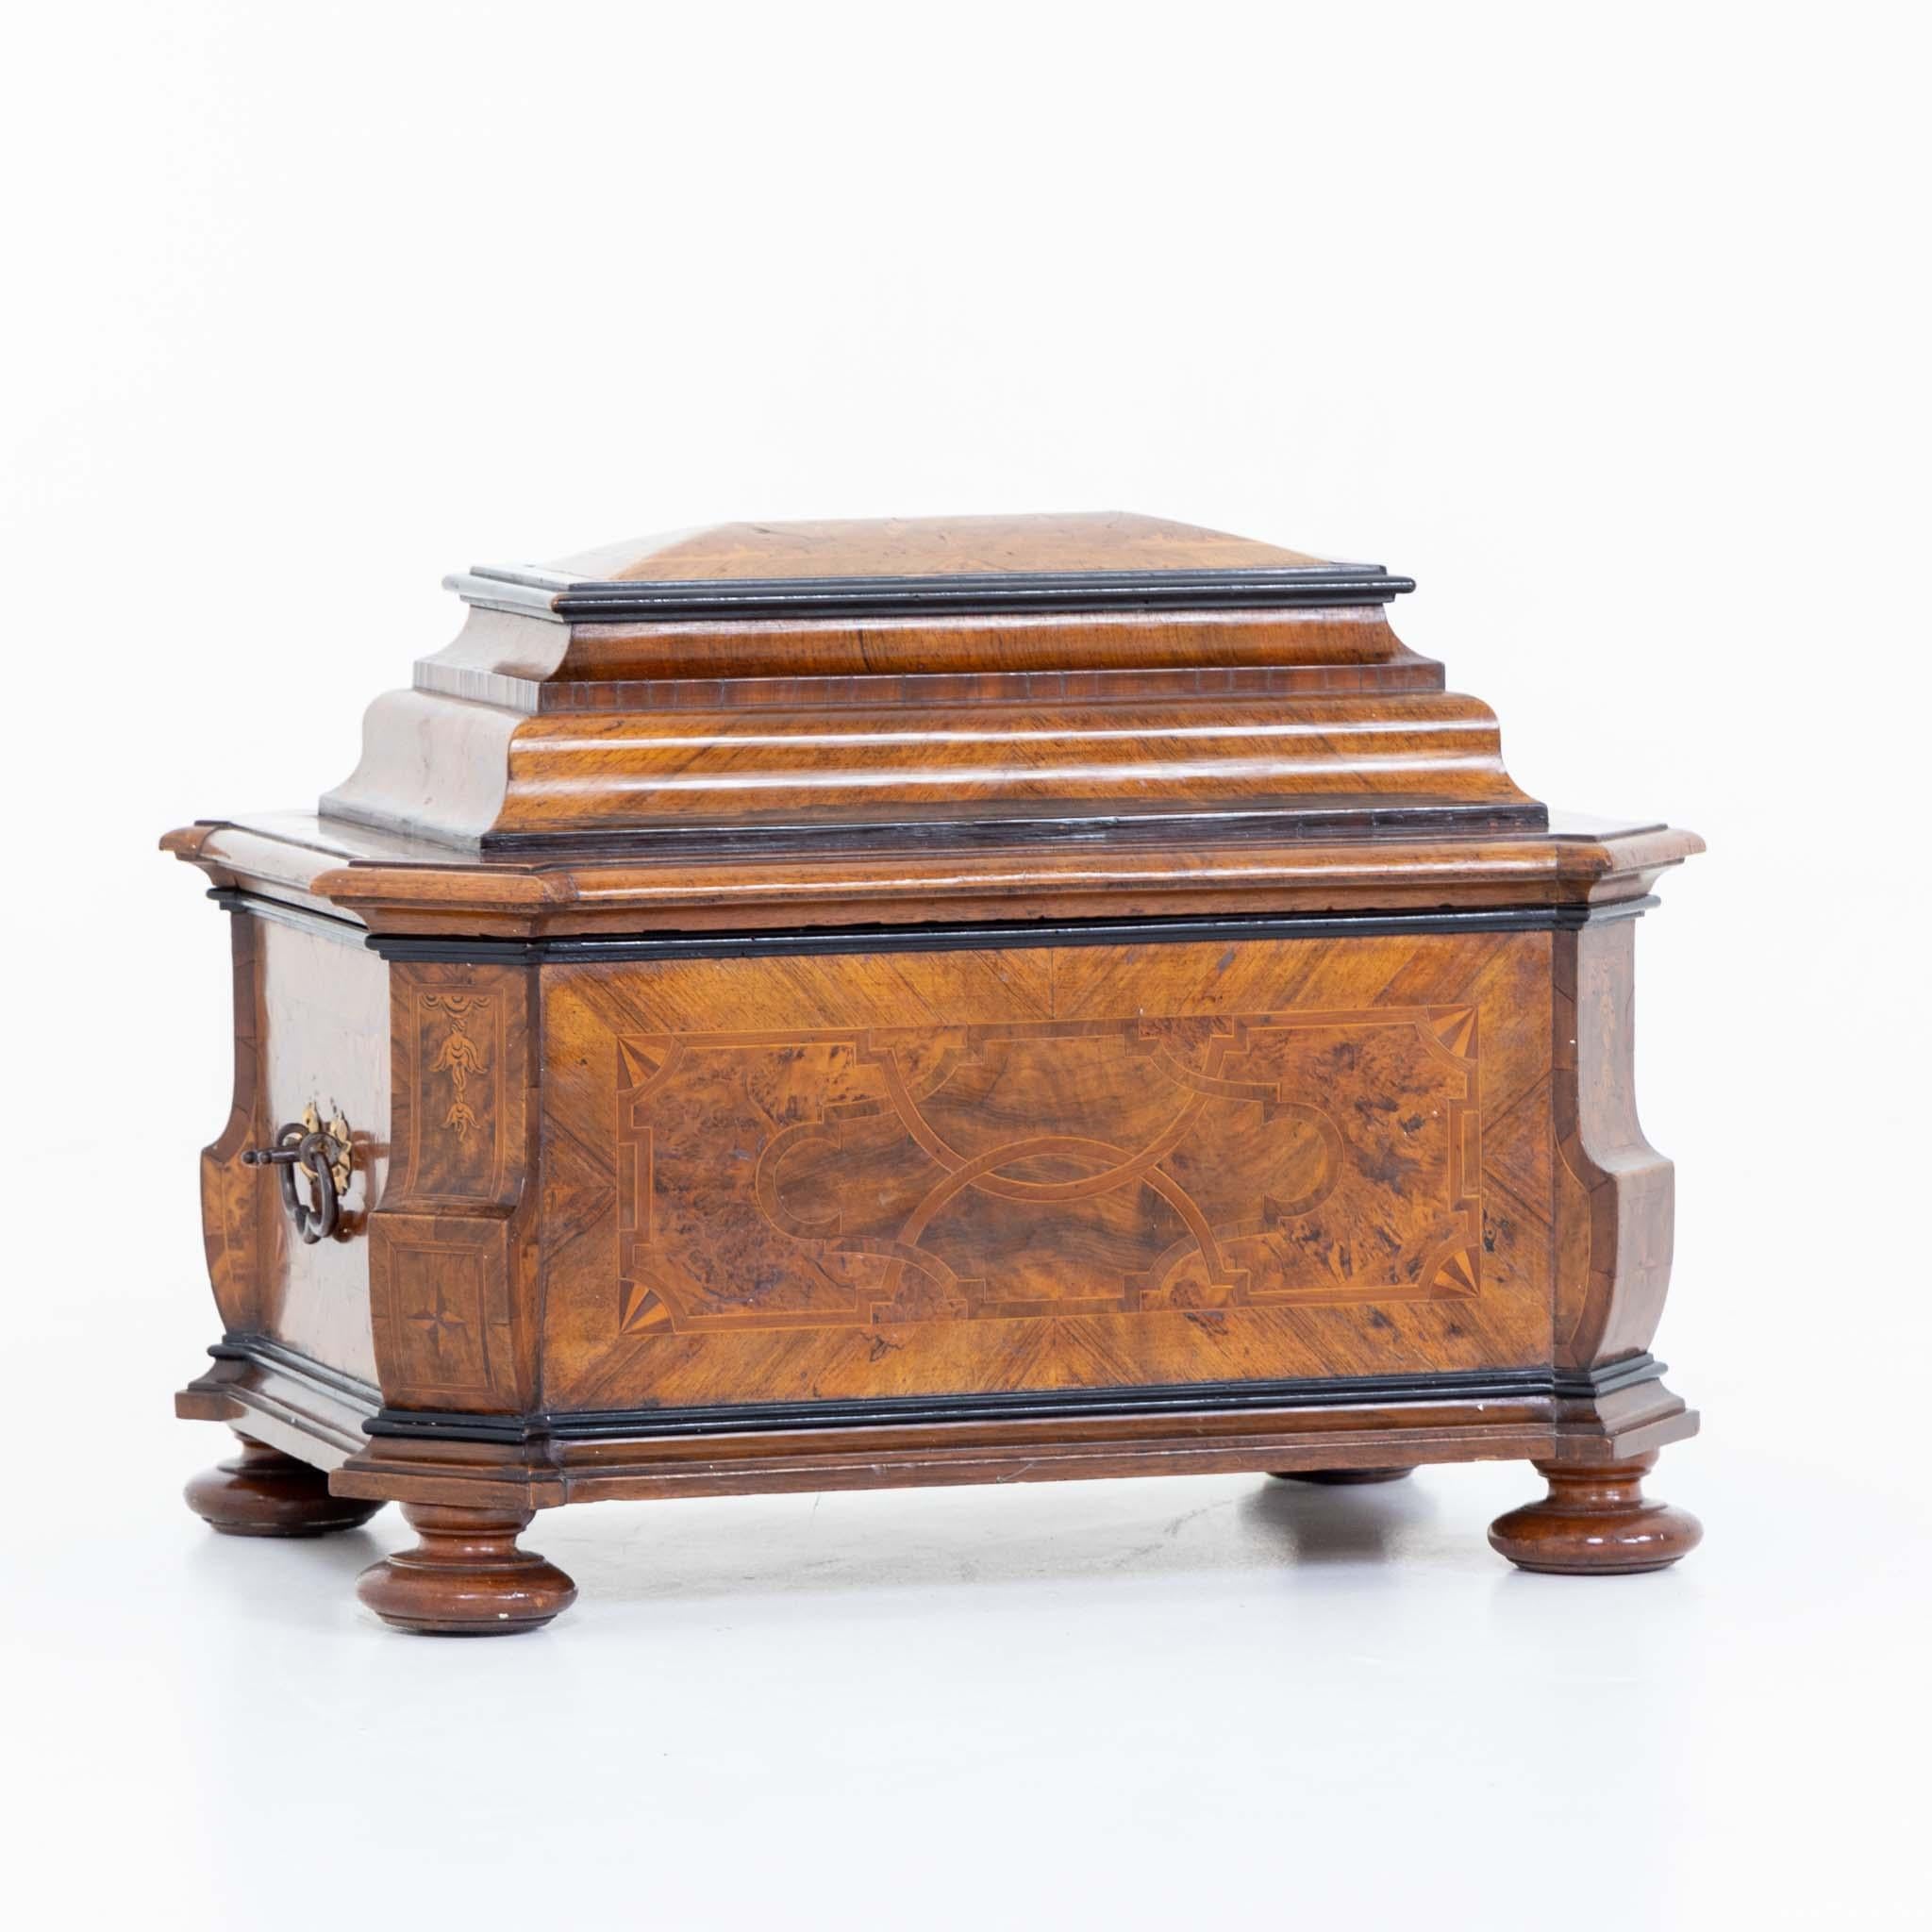 Baroque guild chest on baluster legs in walnut veneer with strap work inlays and side handles. The cushion-shaped lid slides open to reveal the lock.